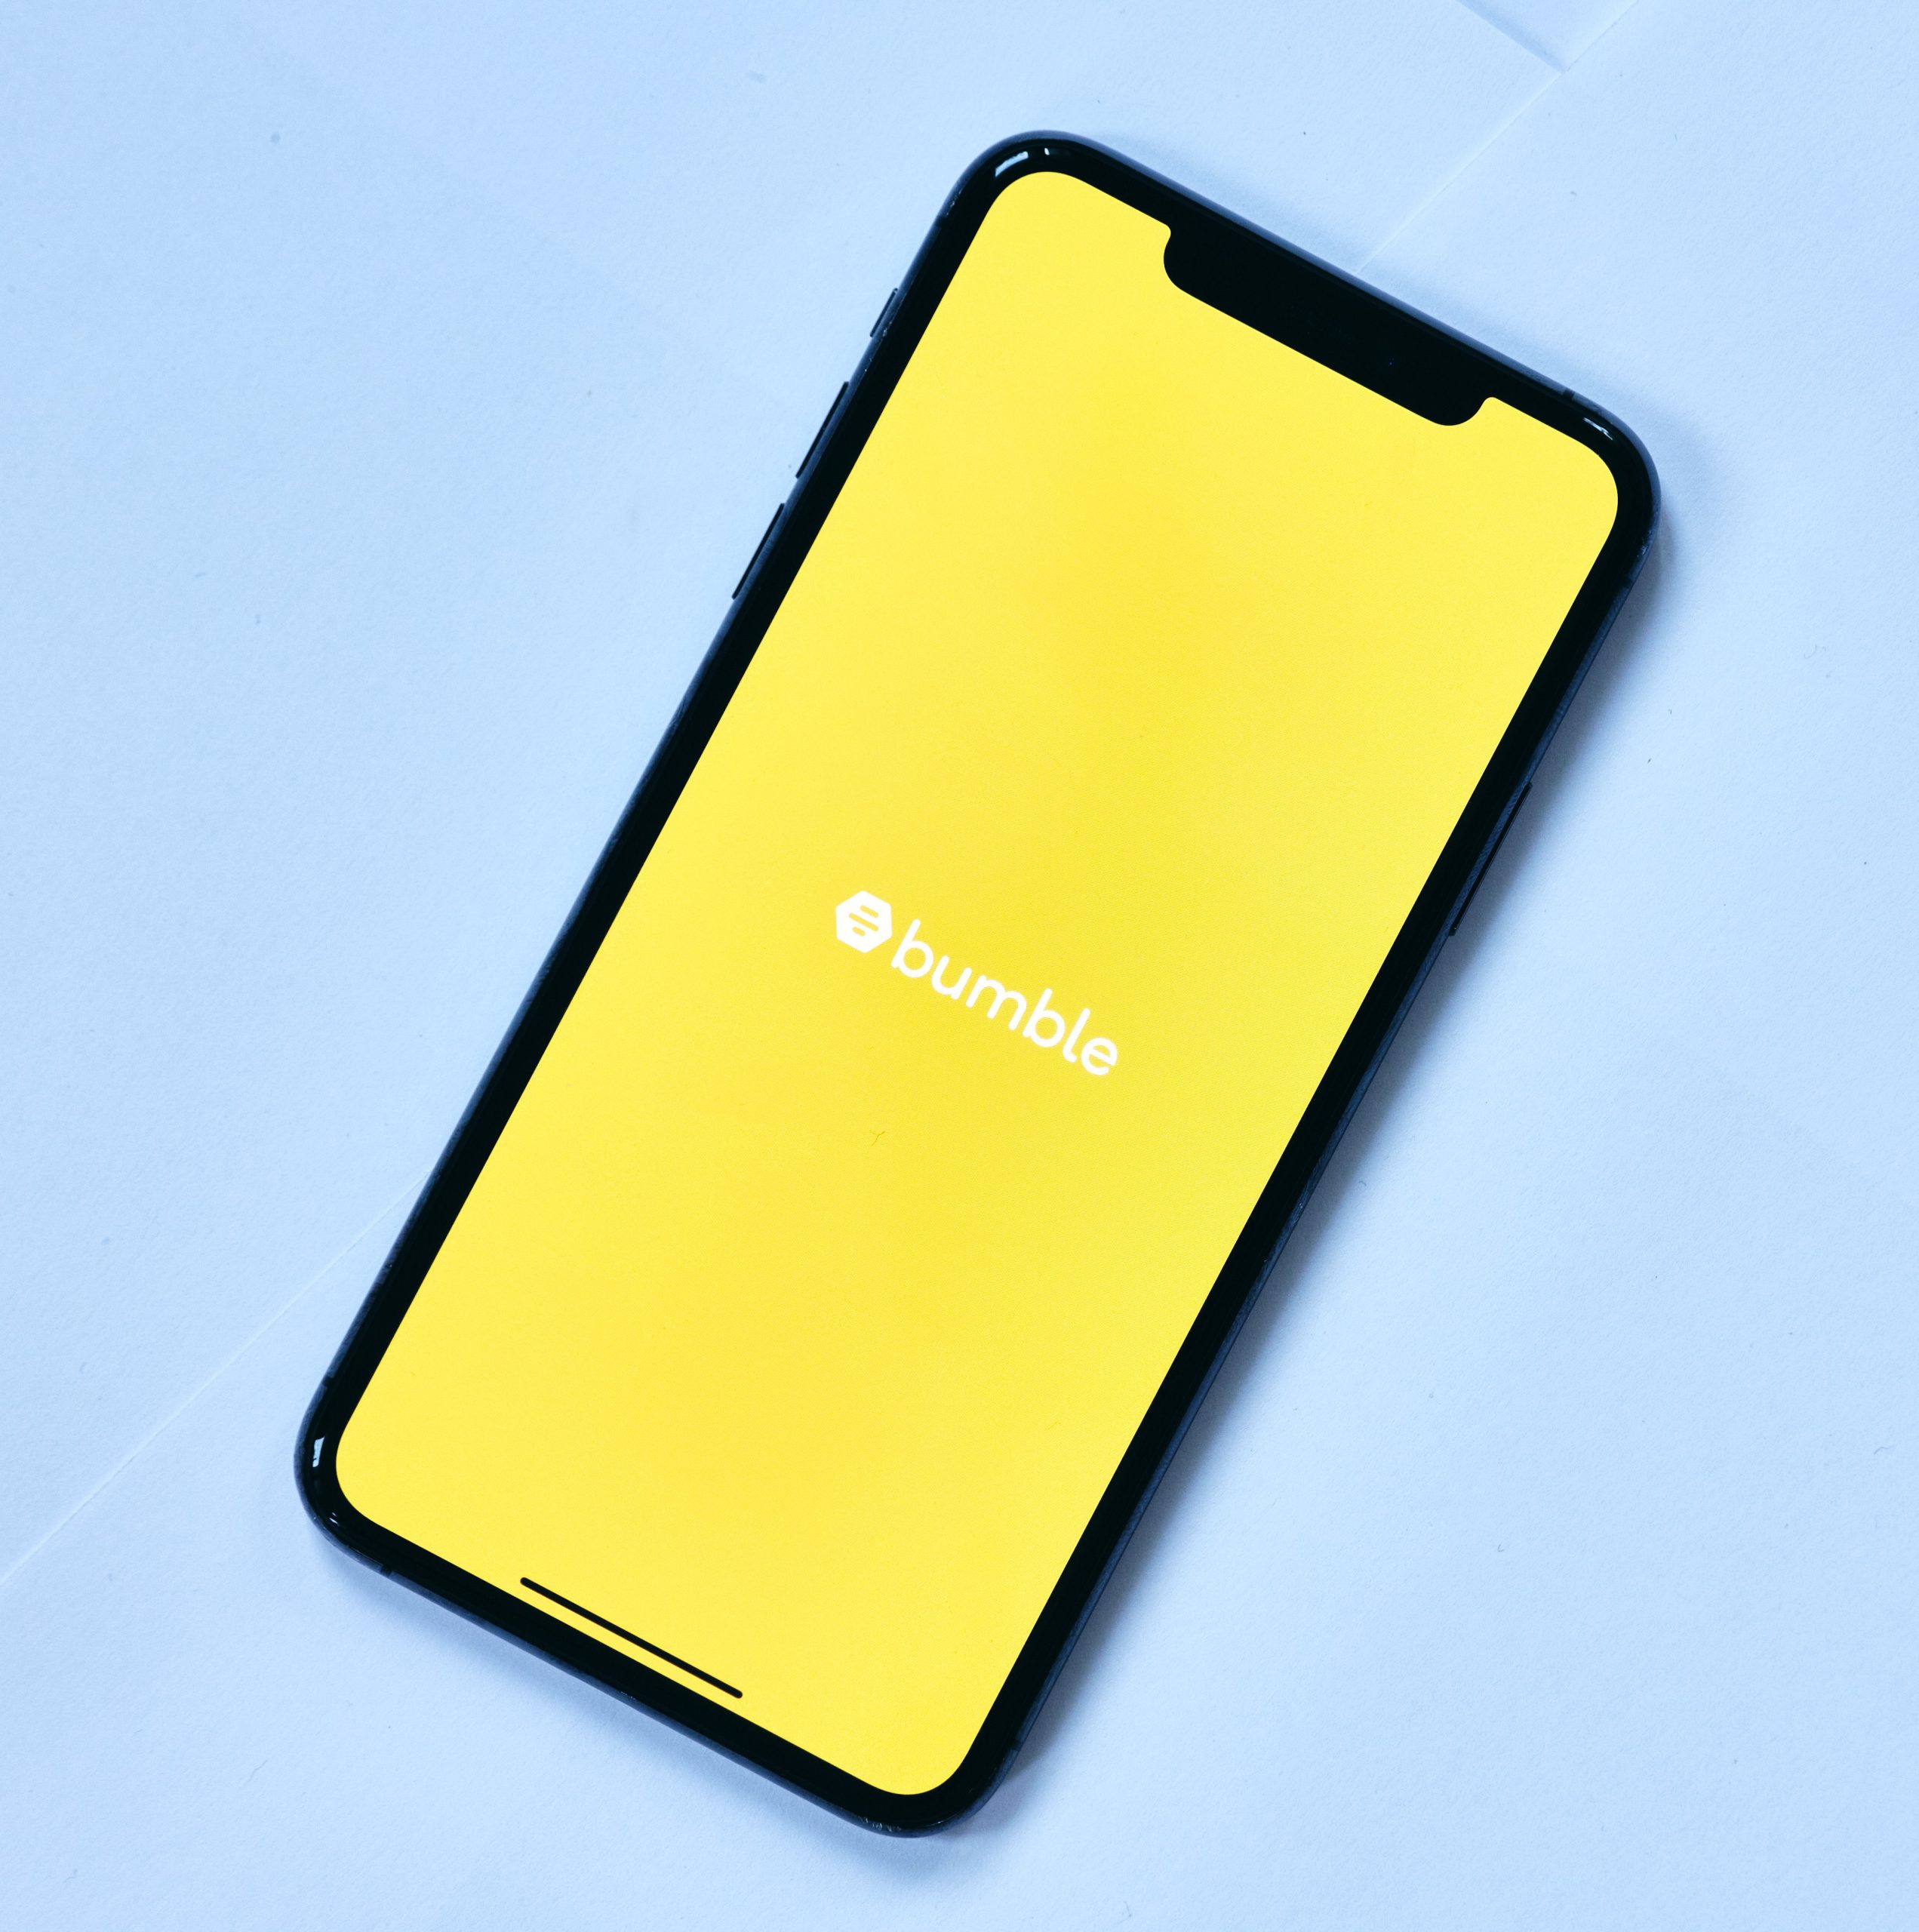 A Smartphone on a light blue background. The words "Bumble" are displayed in white on an all yellow background on the phone.